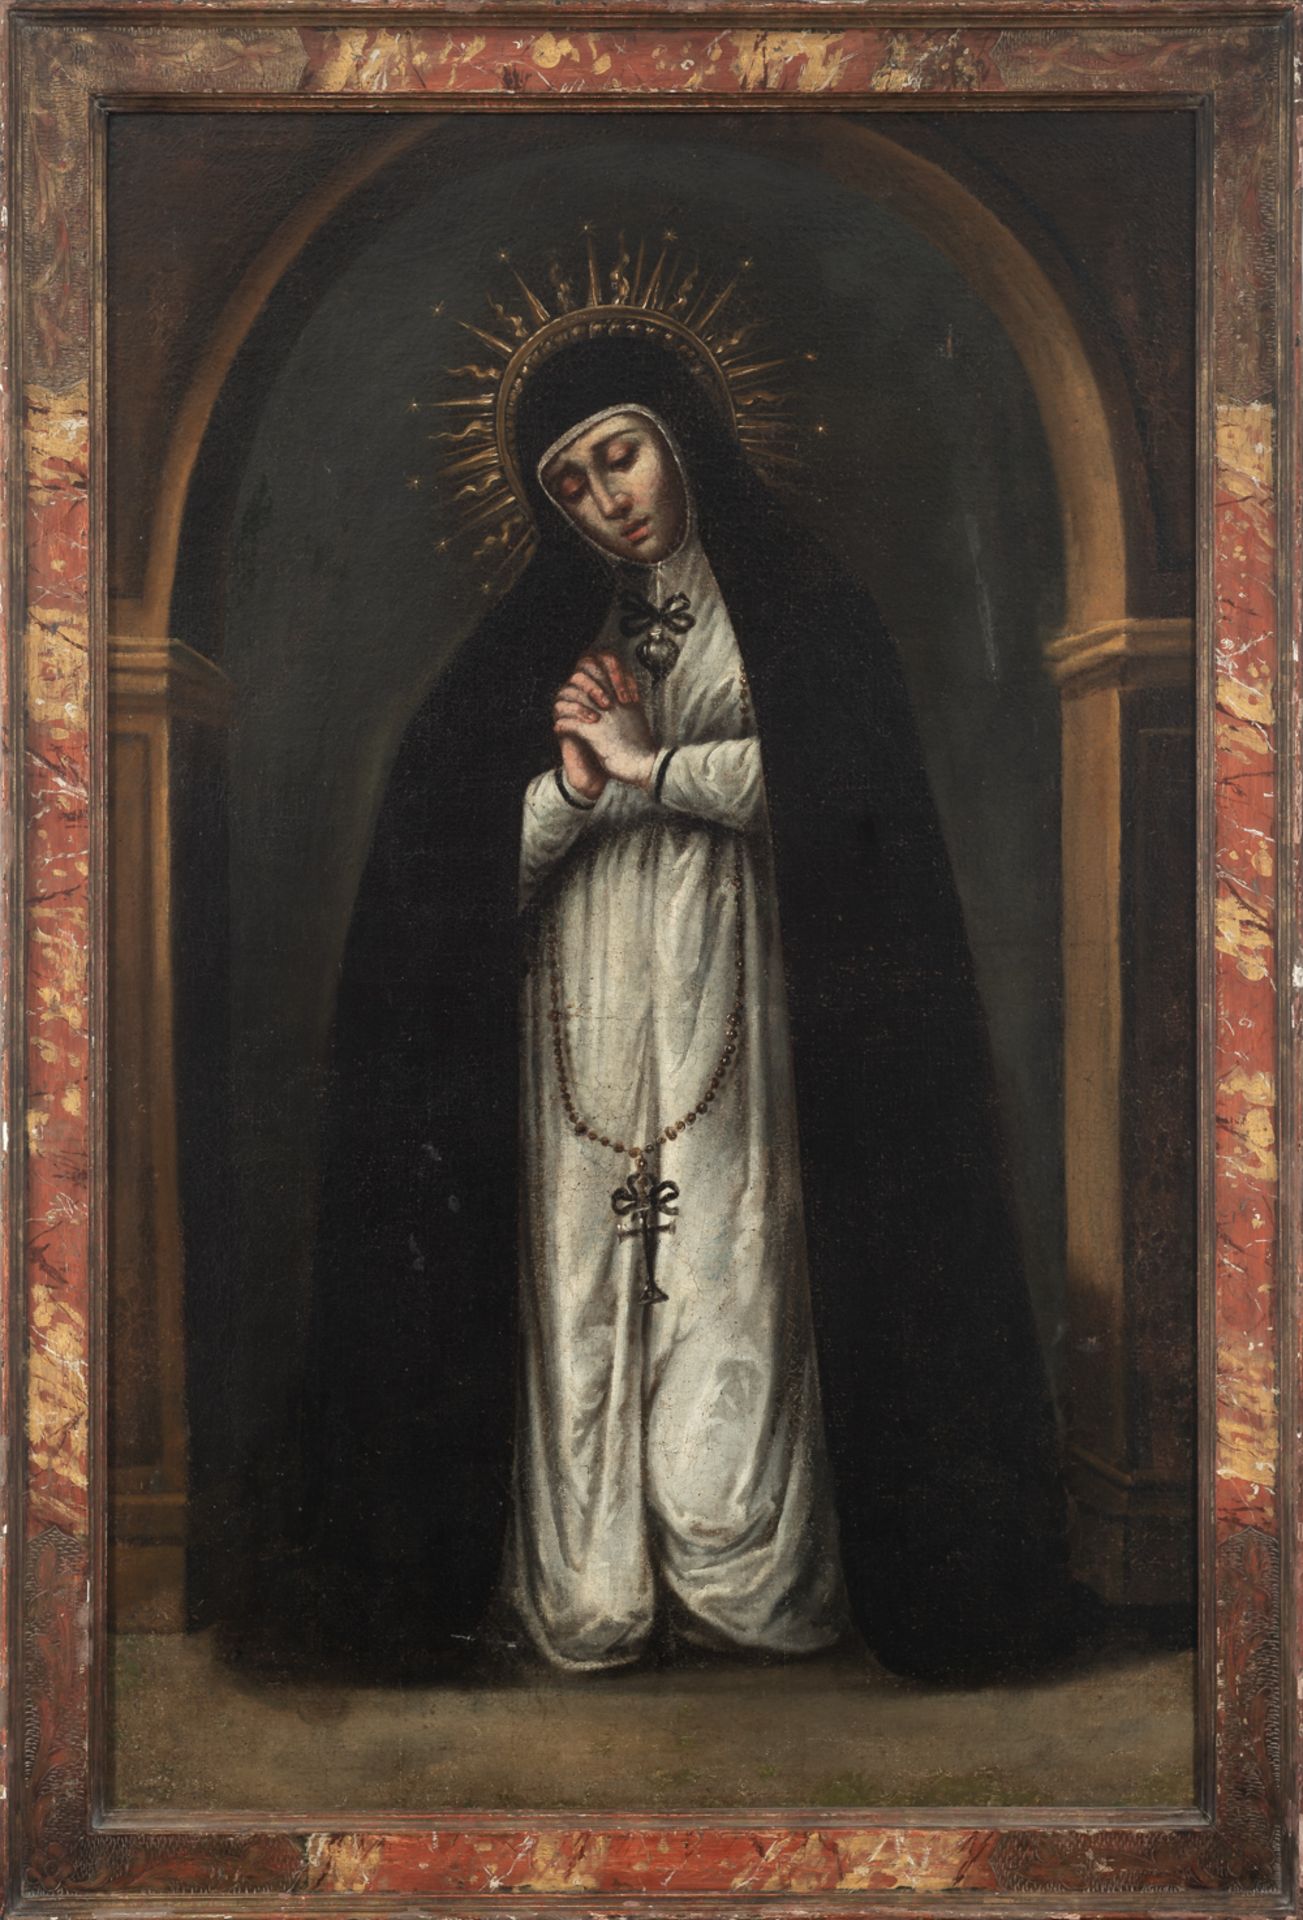 Spanish colonial school, Mexico, 17th century. True Portrait of Our Lady of Solitude from Victoria C